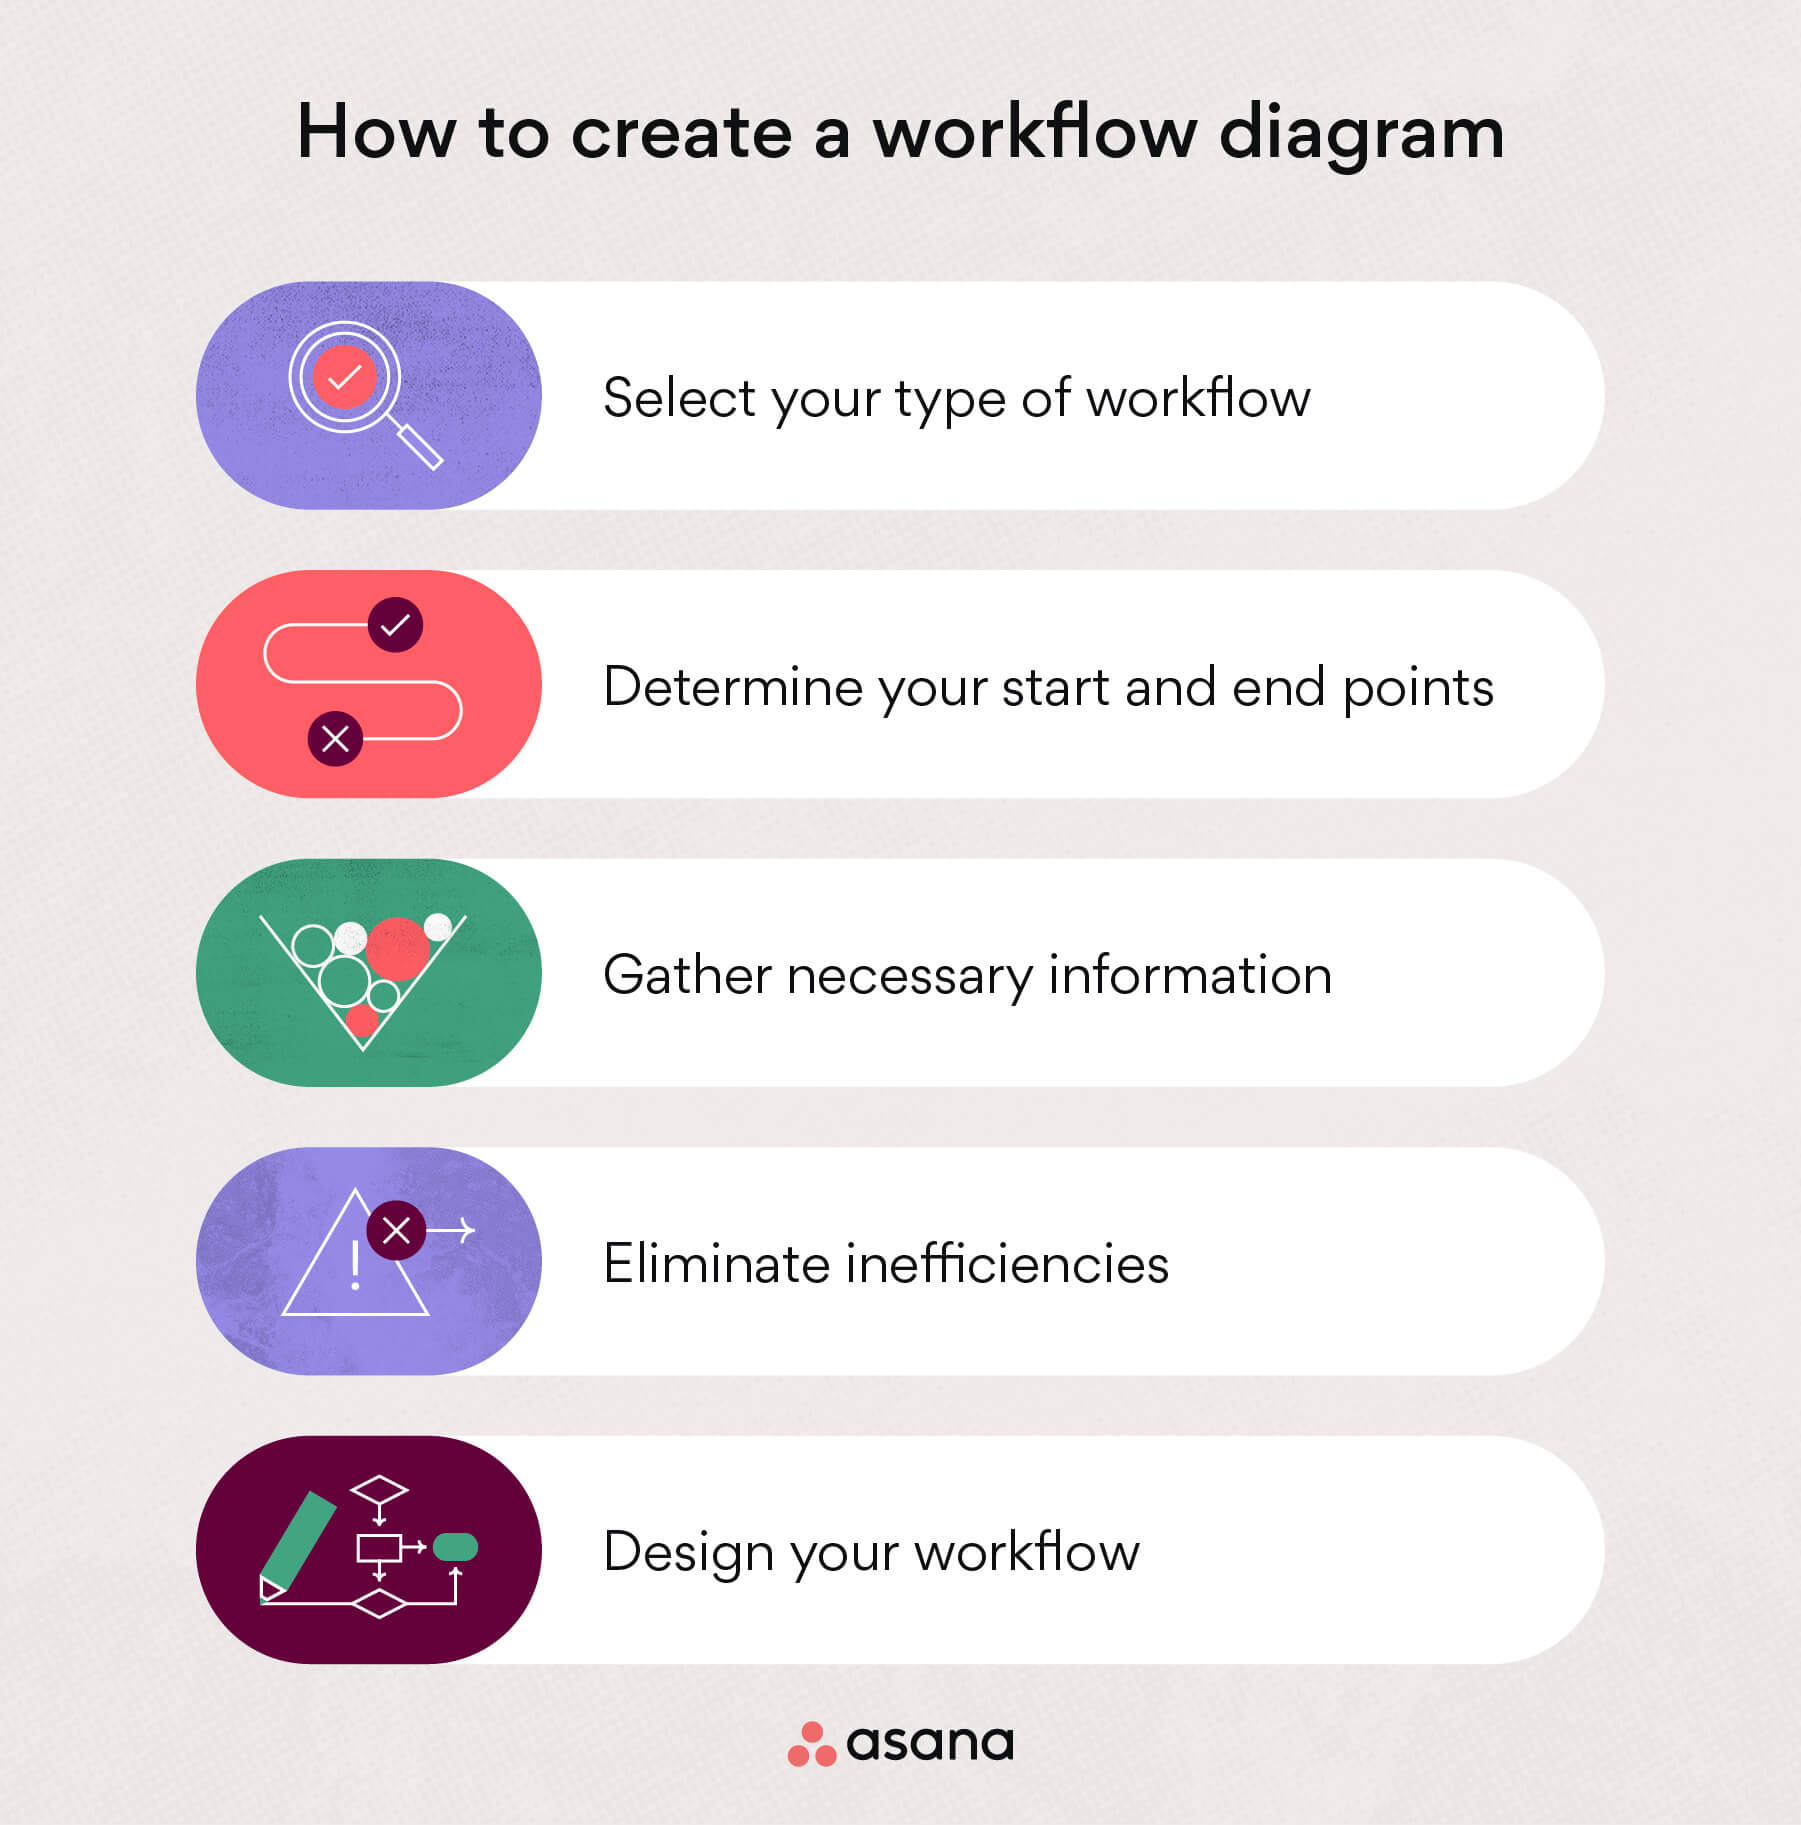 How to create a workflow diagram